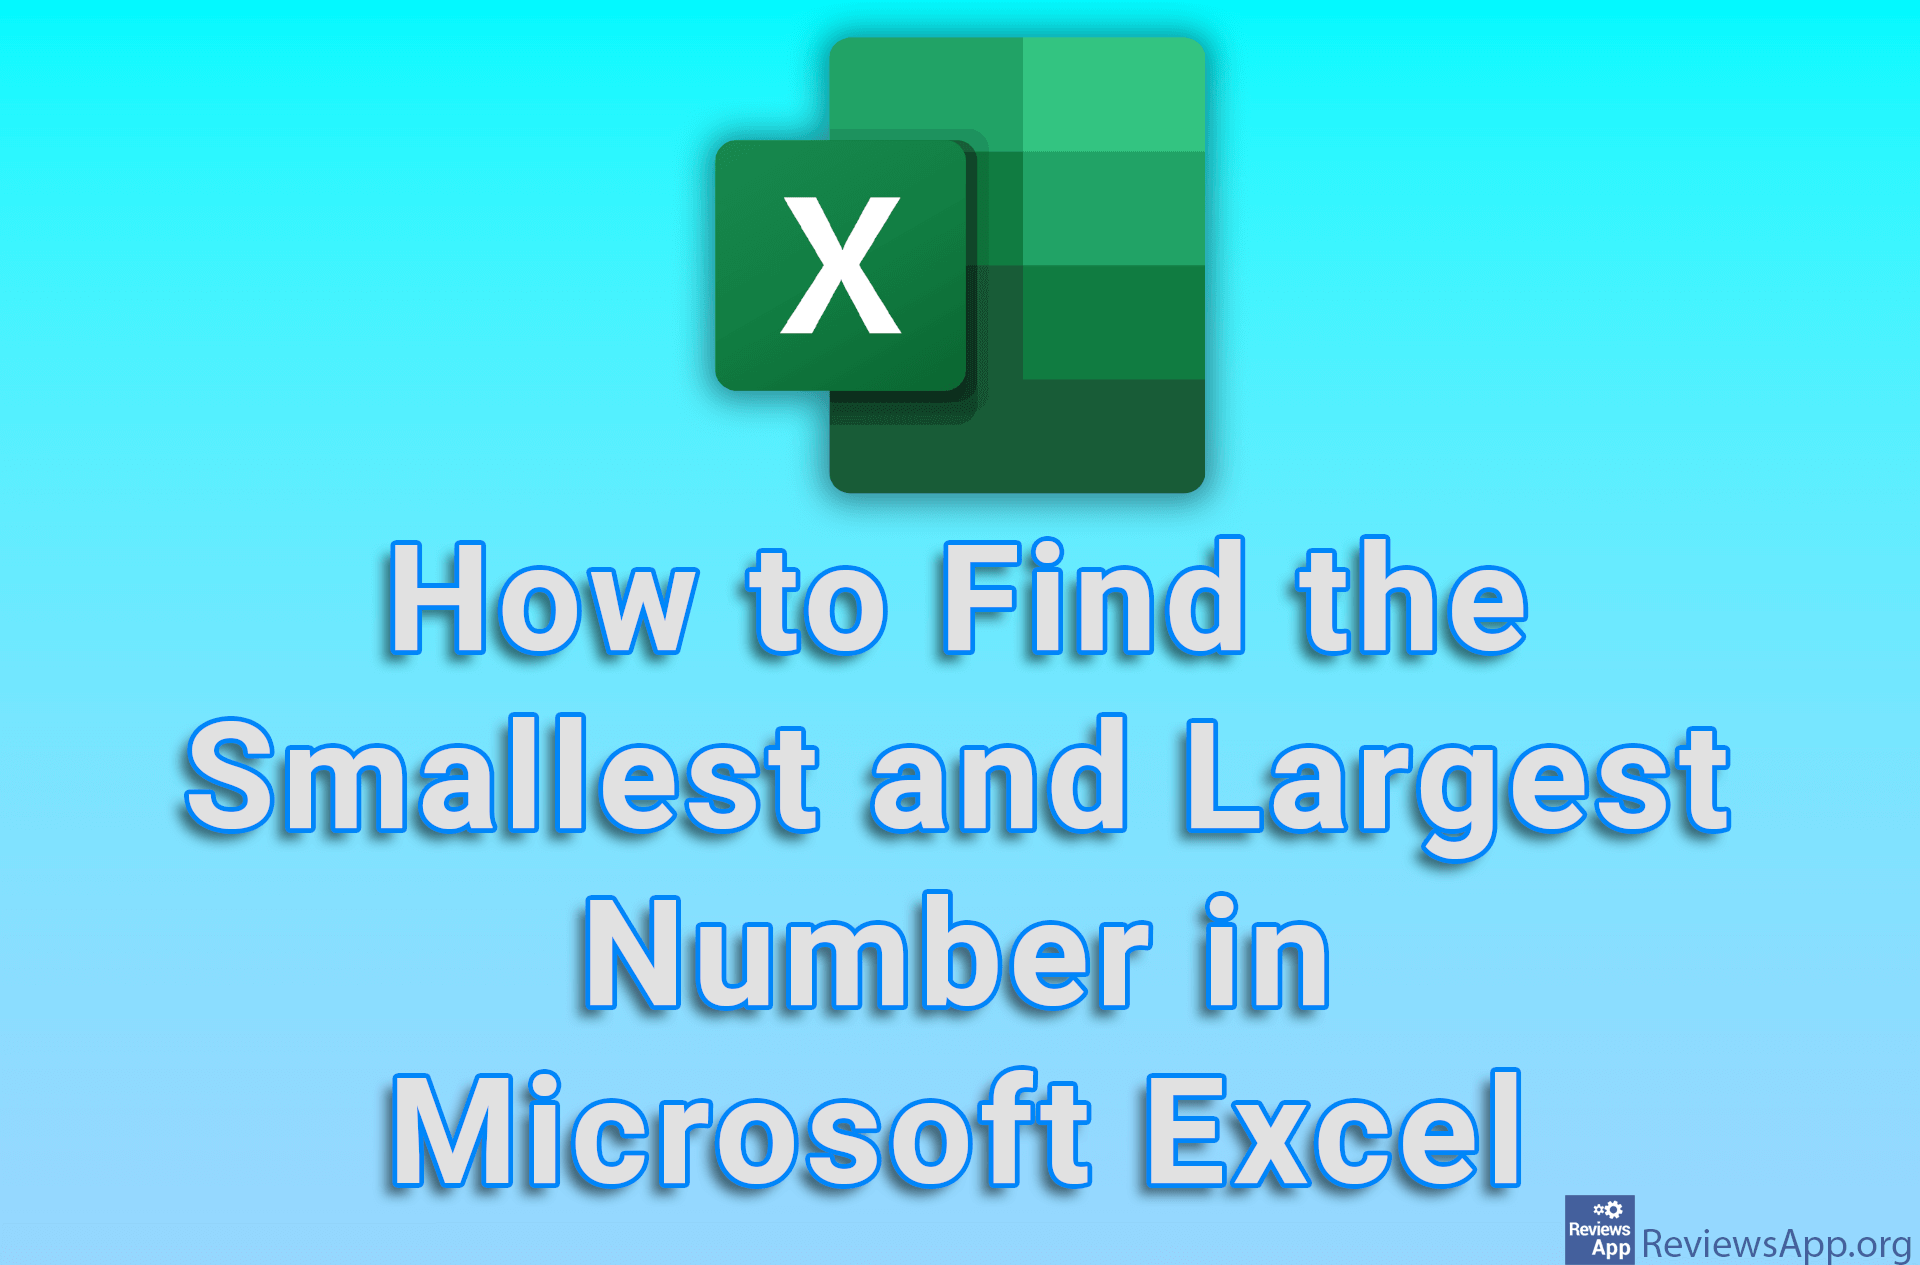 How to Find the Smallest and Largest Number in Microsoft Excel